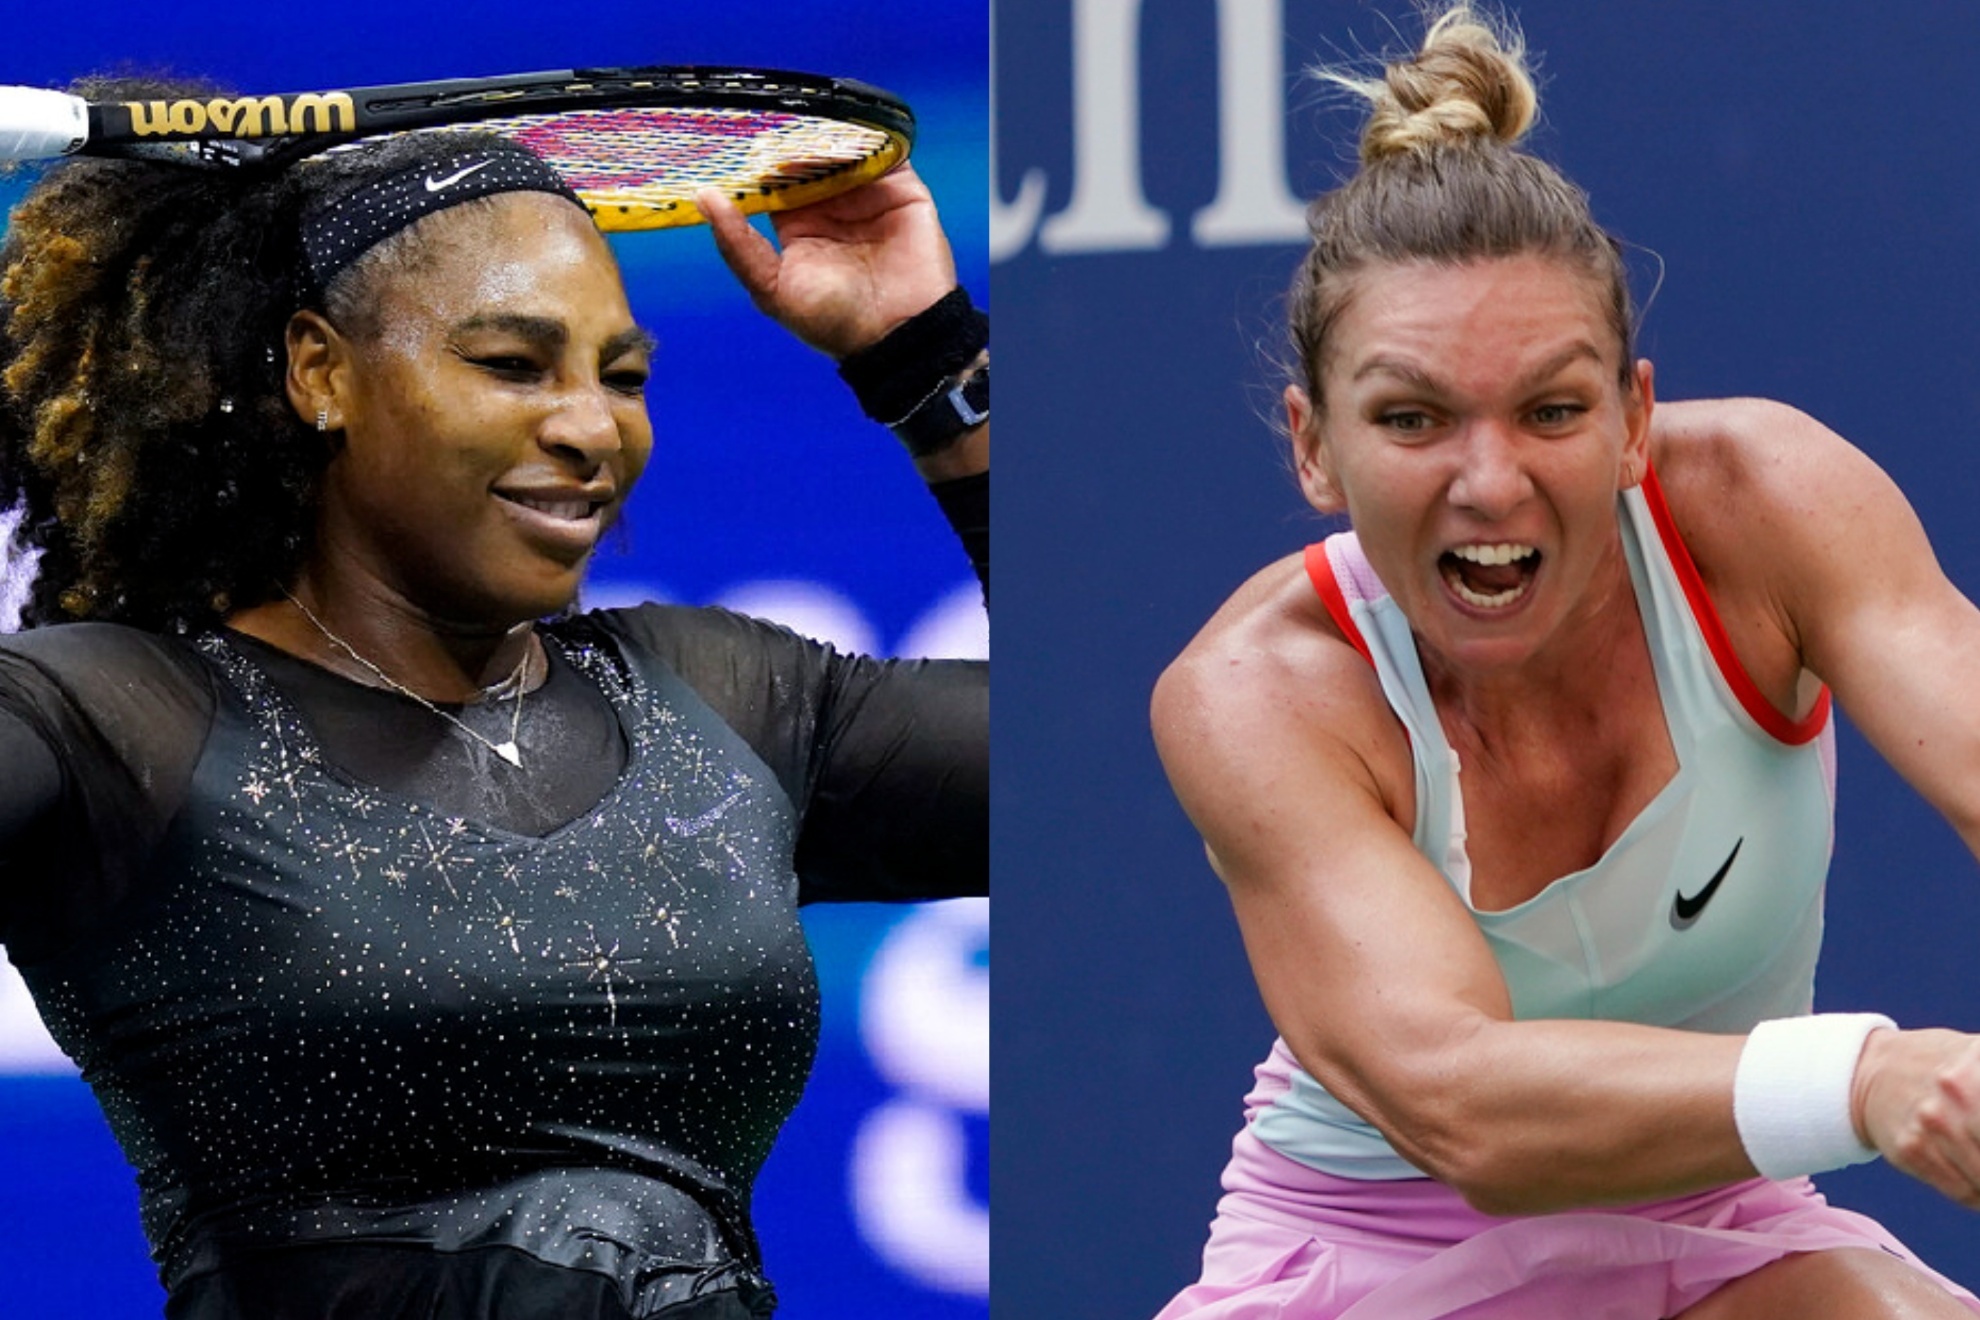 Serena Williams took a jab at suspended rival Simona Halep